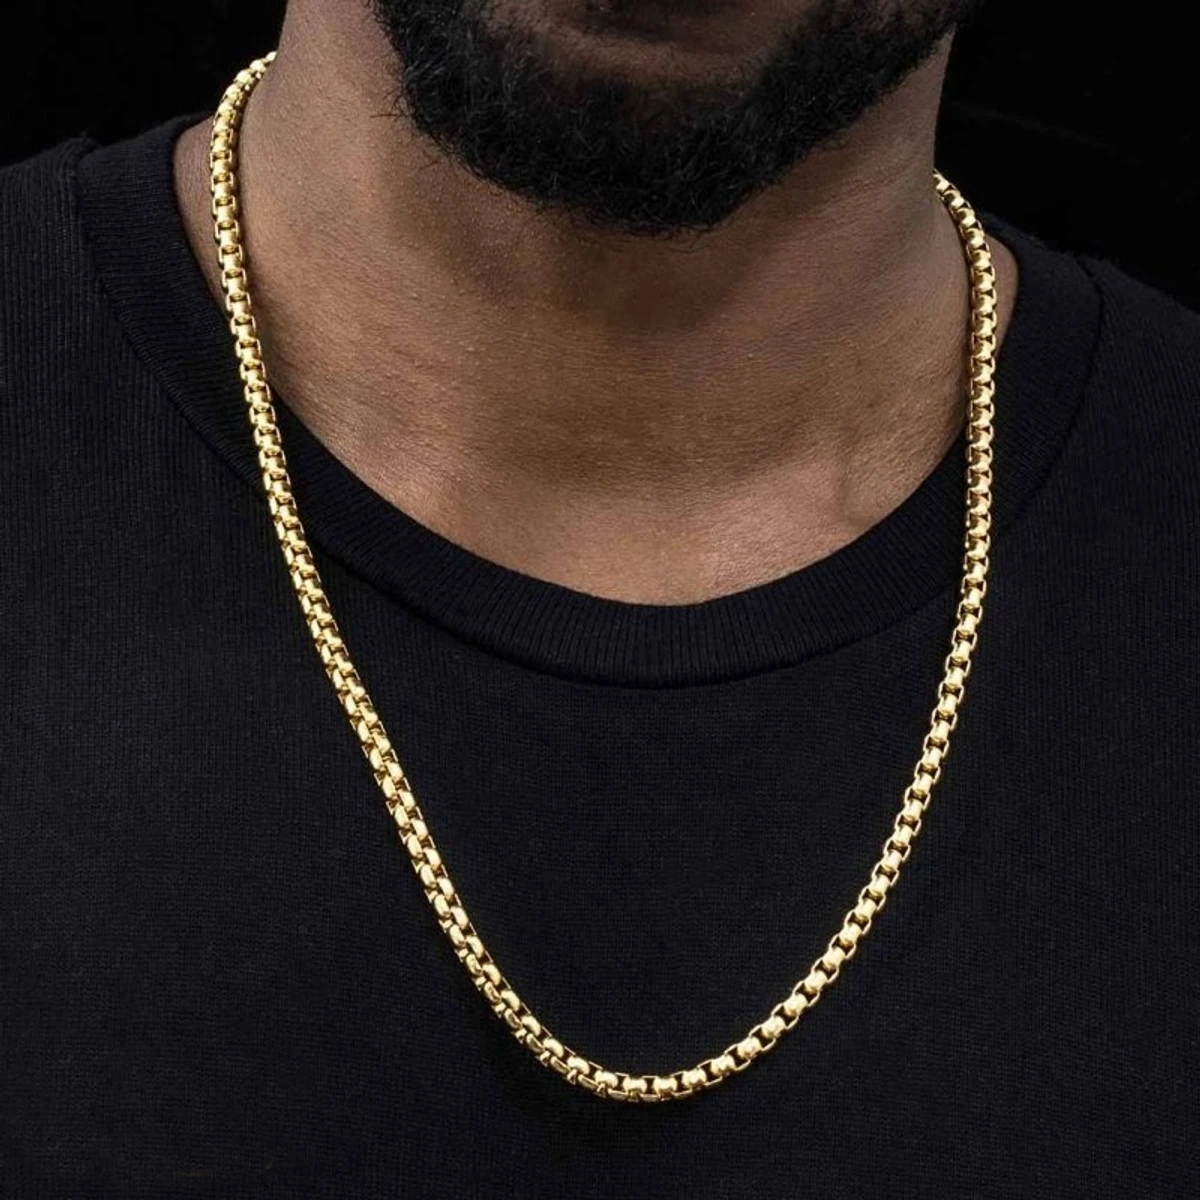 Stainless Steel Box Chain Necklace for Men